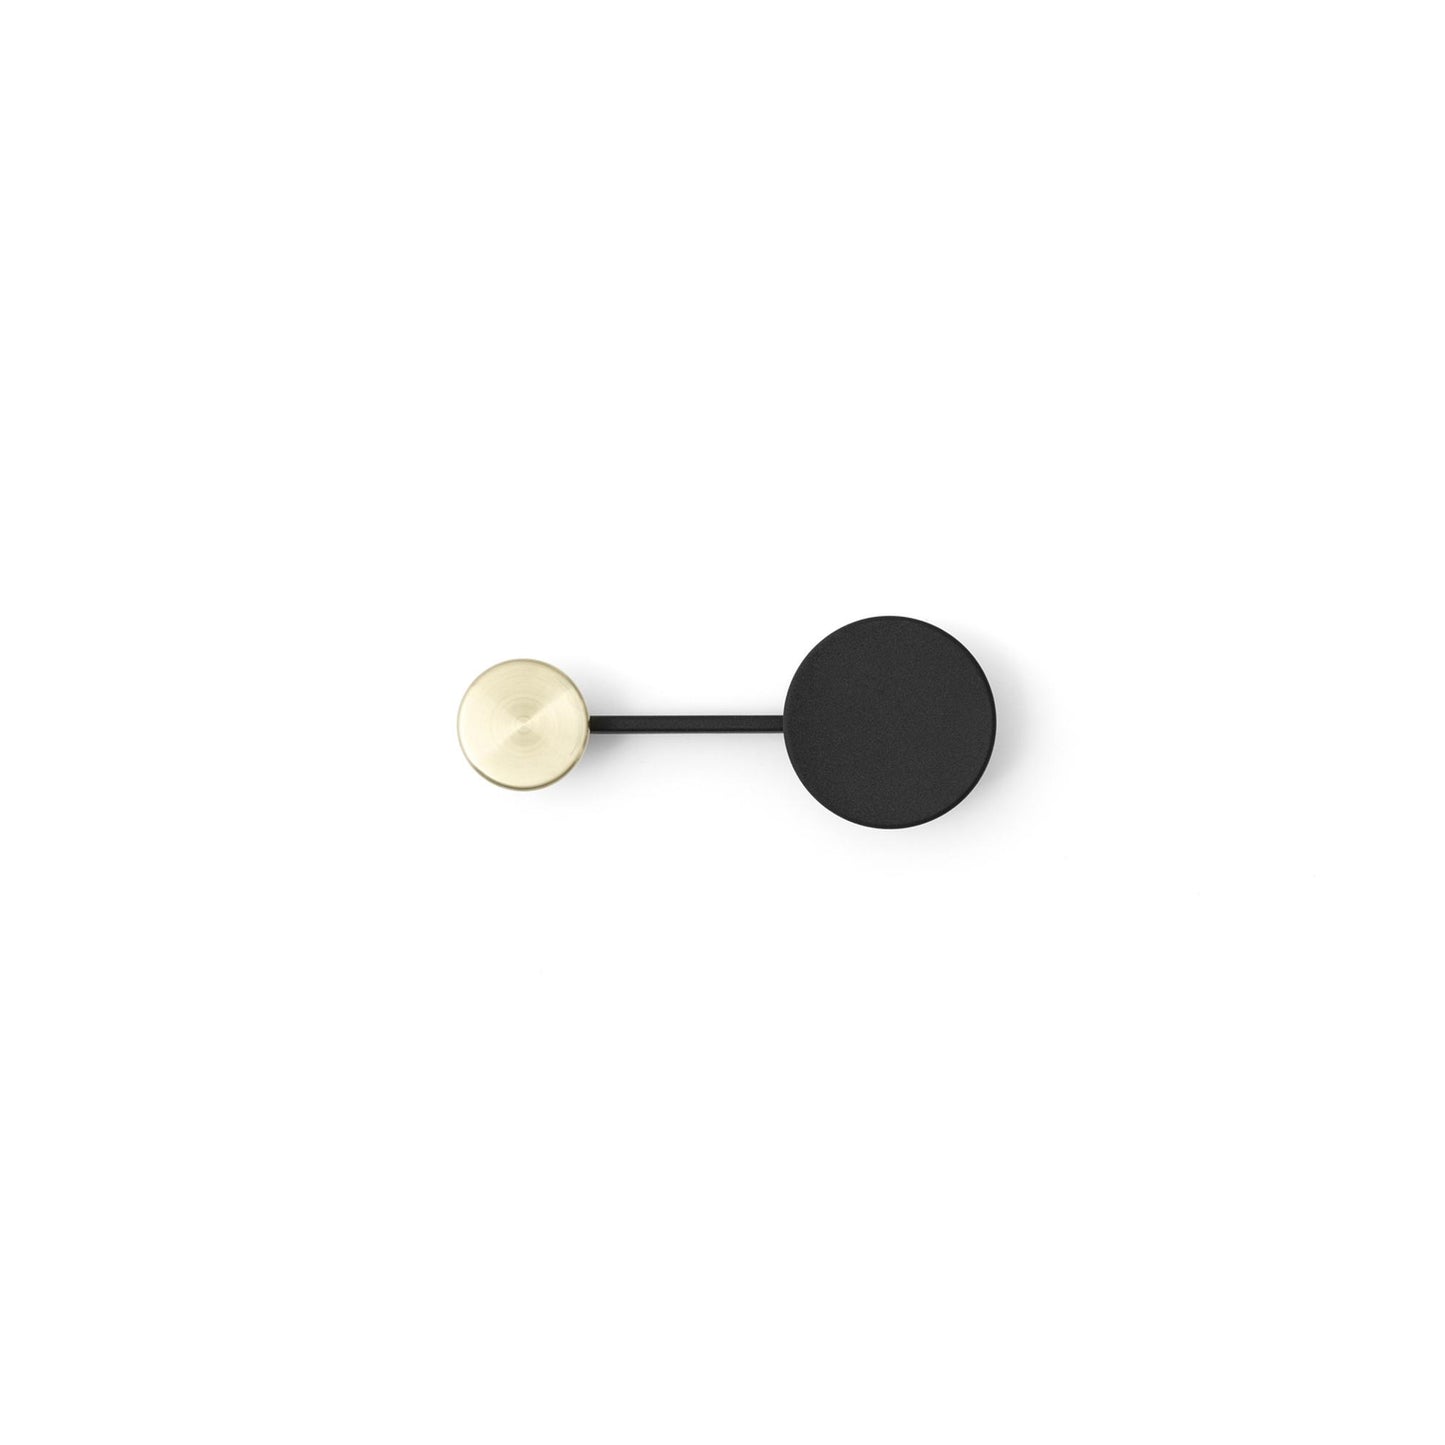 Afteroom Coat Hanger Small by Audo #Black/ Brass